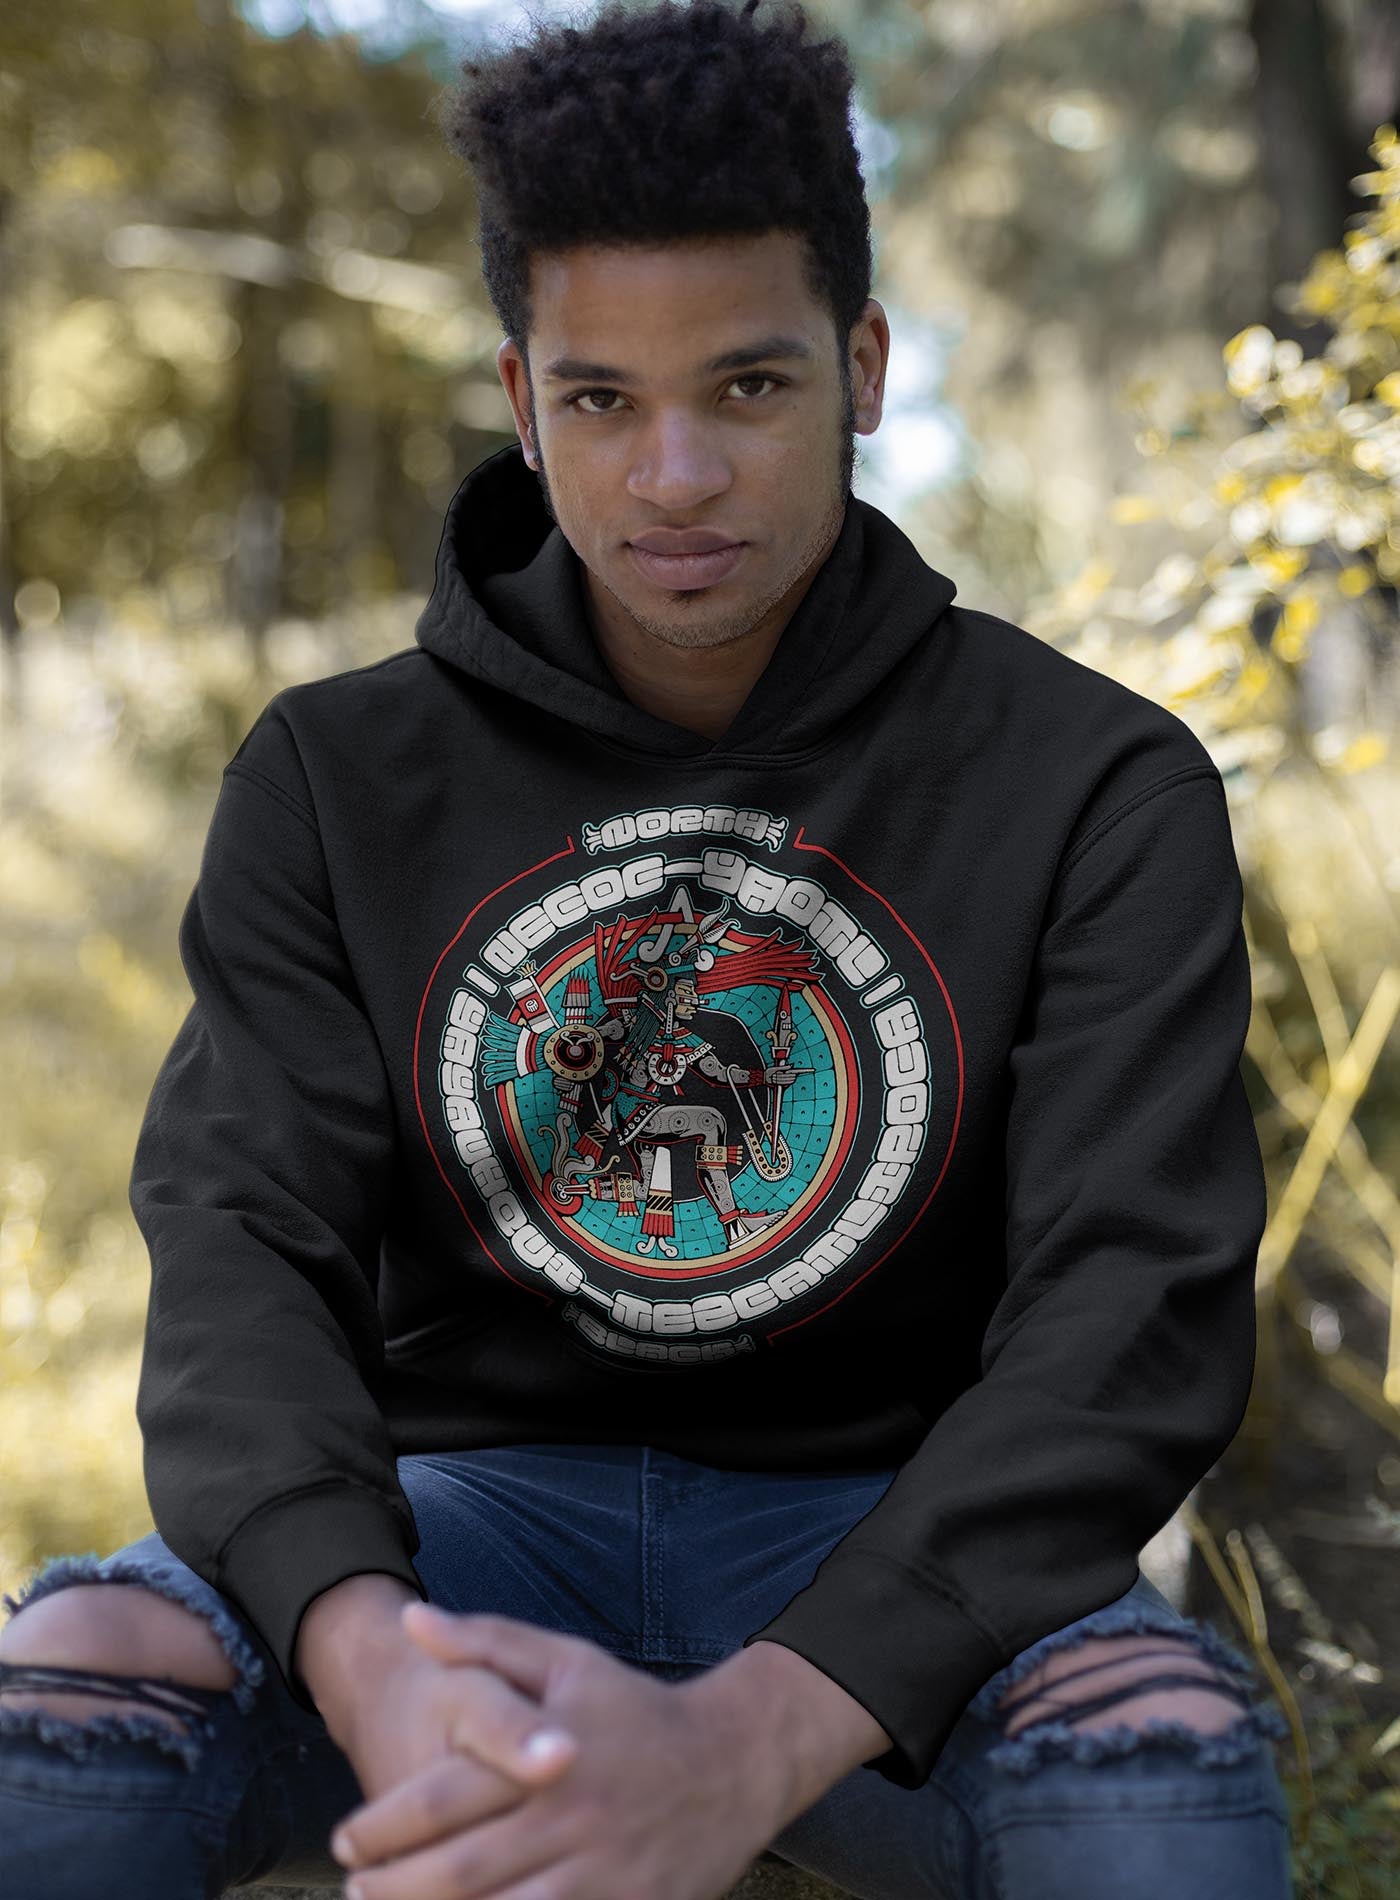 man modeling a black unisex hoodie featuring a front print of the toltec-aztec god Yayauhqui-Tezcatlipoca also known as Necoc-yaotl. Reinterpretation by Mexican illustrator G.M. Meave.